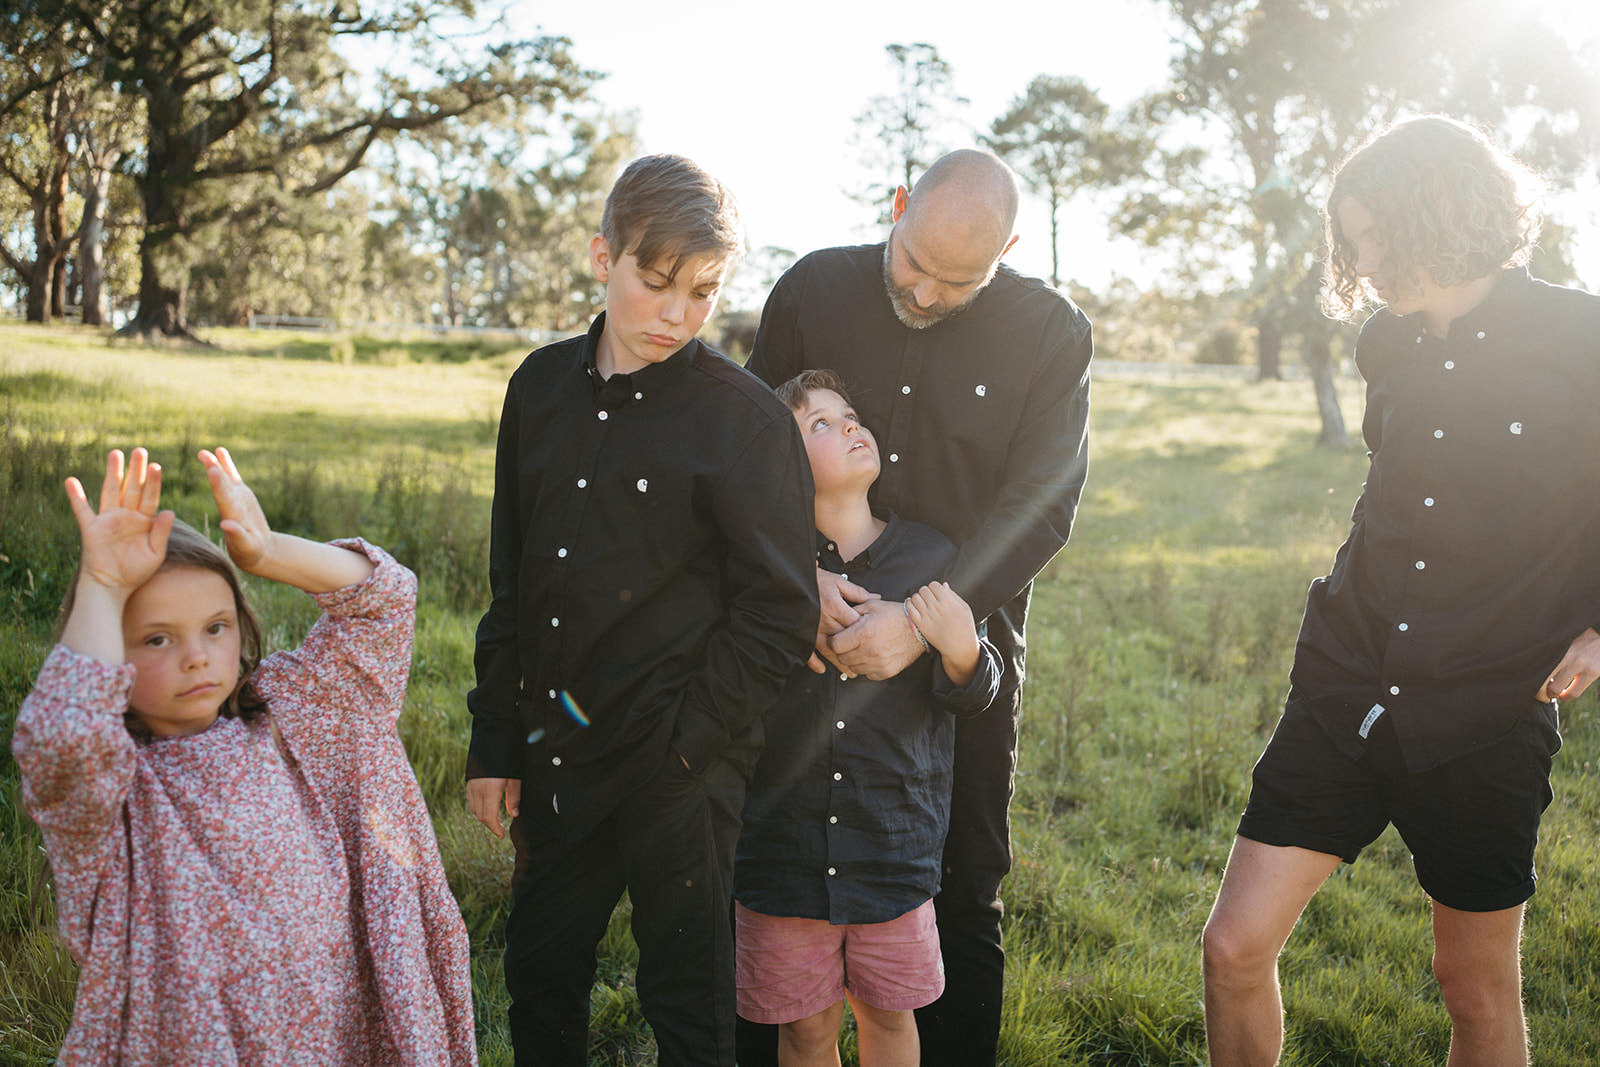 informal documentary image of a dad and his children outdoors in a paddock